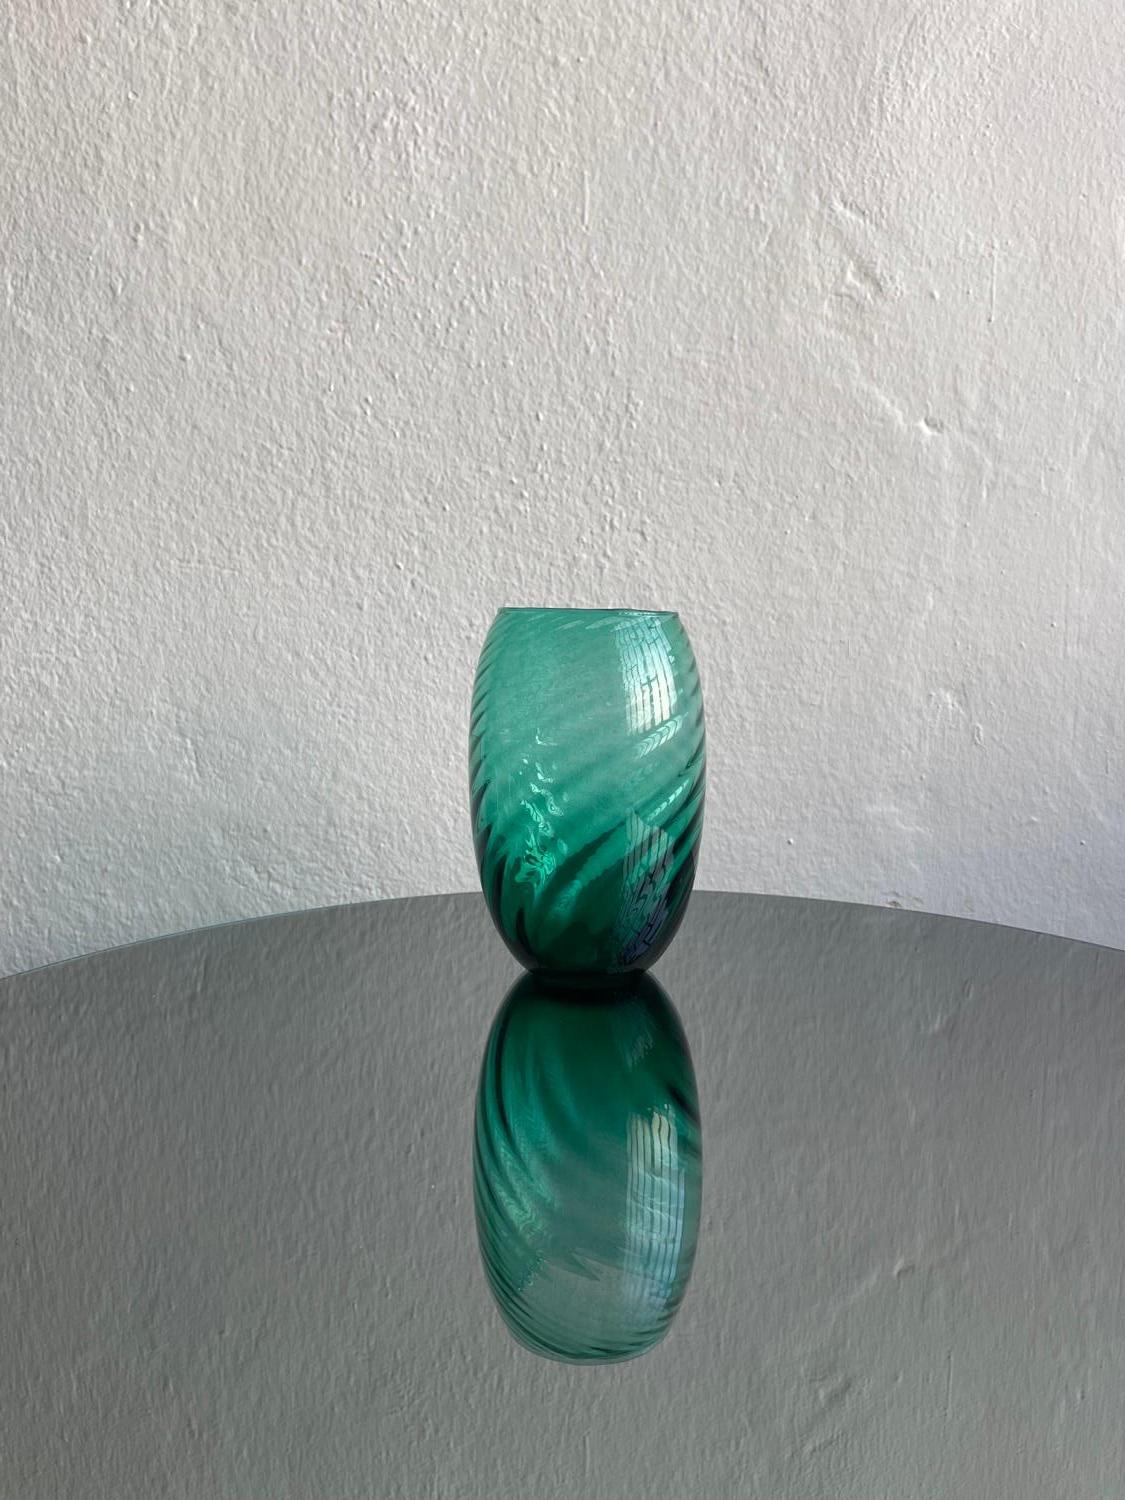 Hand blown glass vase - Murano glass vase - Spiral Murano vase

Wonderful green vase in hand blown Murano glass, decorated with a stamped spiral pattern running all along the surface. A small original sticker, visible in photos but very faded, reads